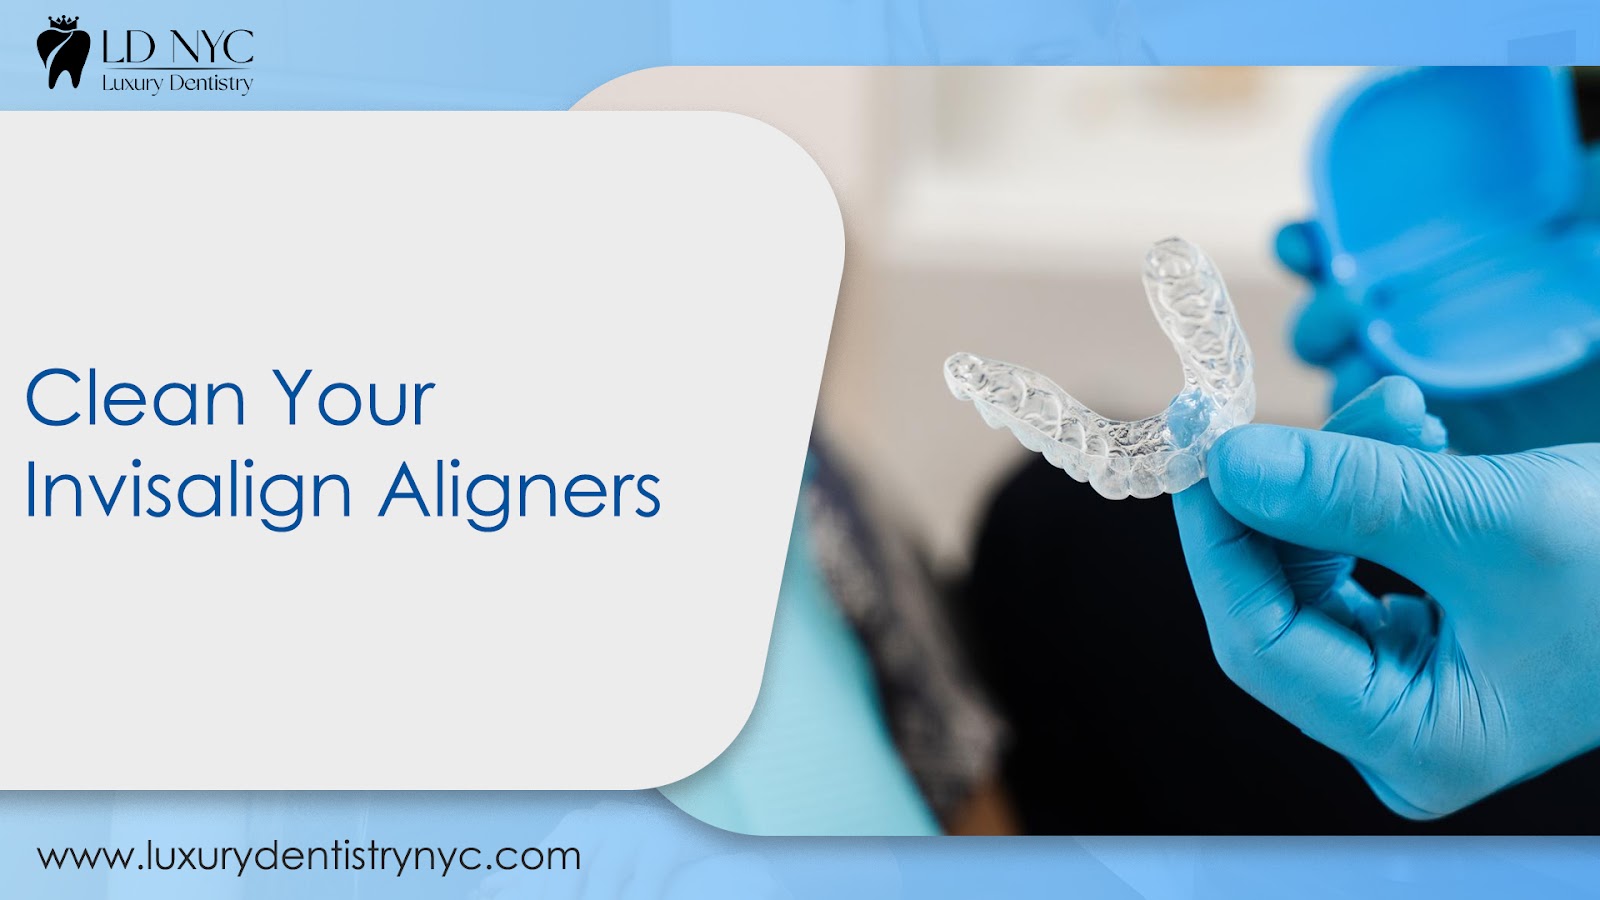 Clean Your Invisalign Aligners